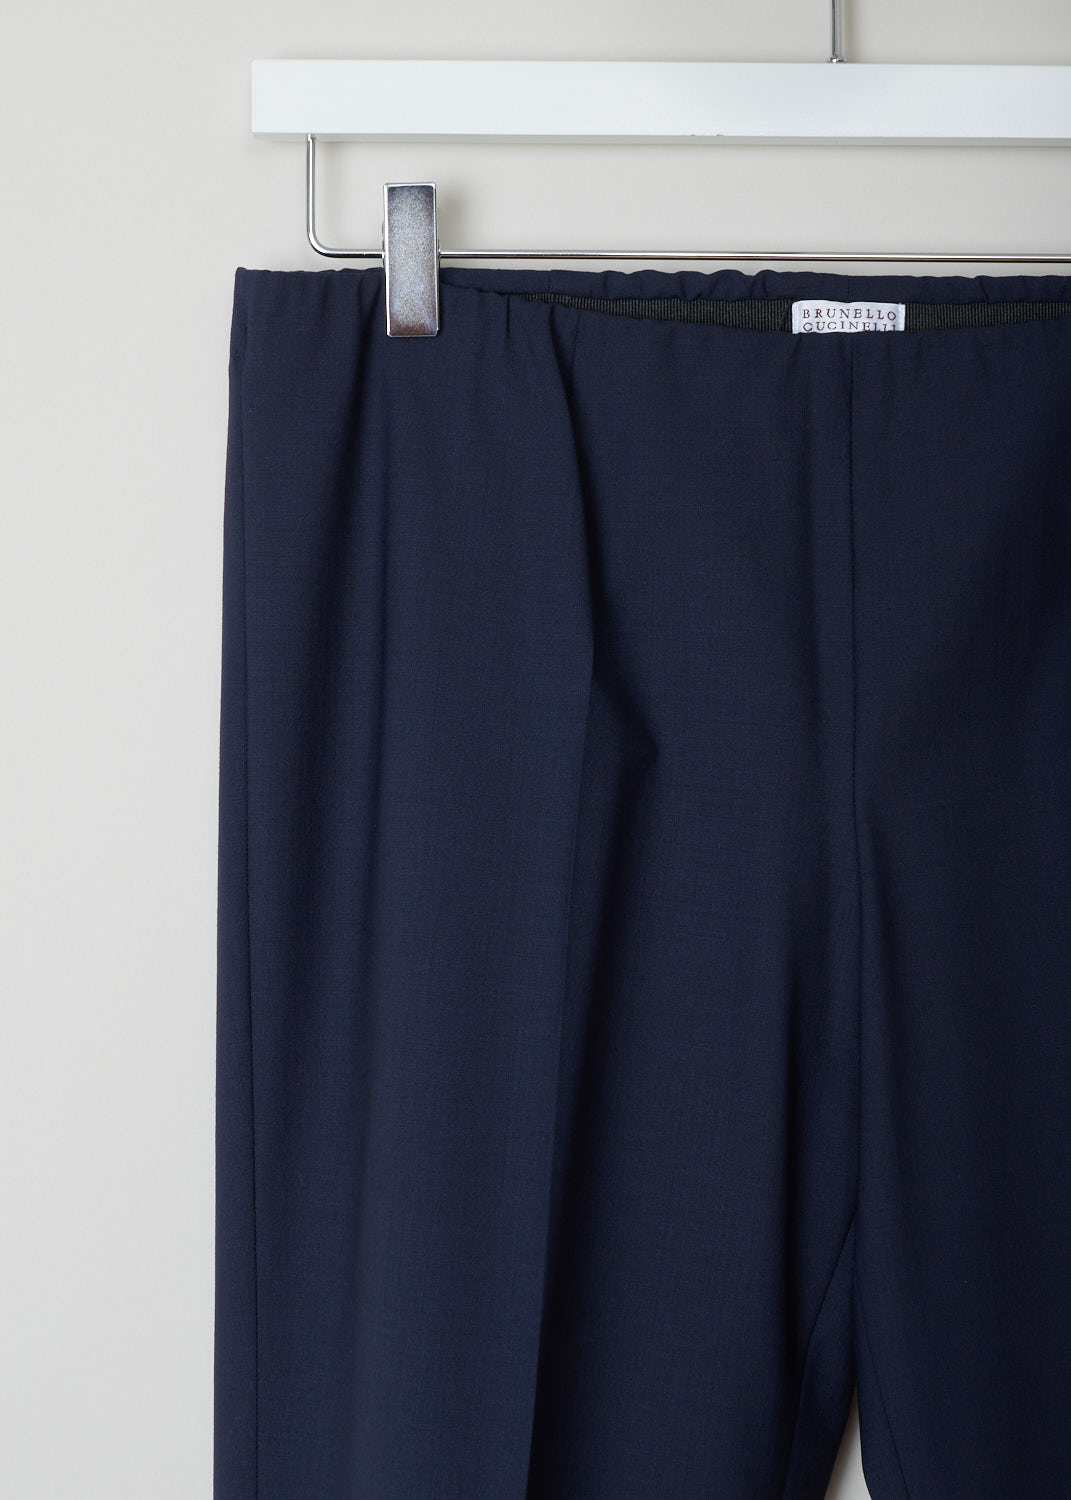 Brunello Cucinelli, Navy pants with an elastic waistband, M0F70P1794_C2931, blue, detail, Empower your outfit with these minimalistic designed pants, in a lightweight wool. These low cut pants have a slim fit and a concealed elasticated waistband.